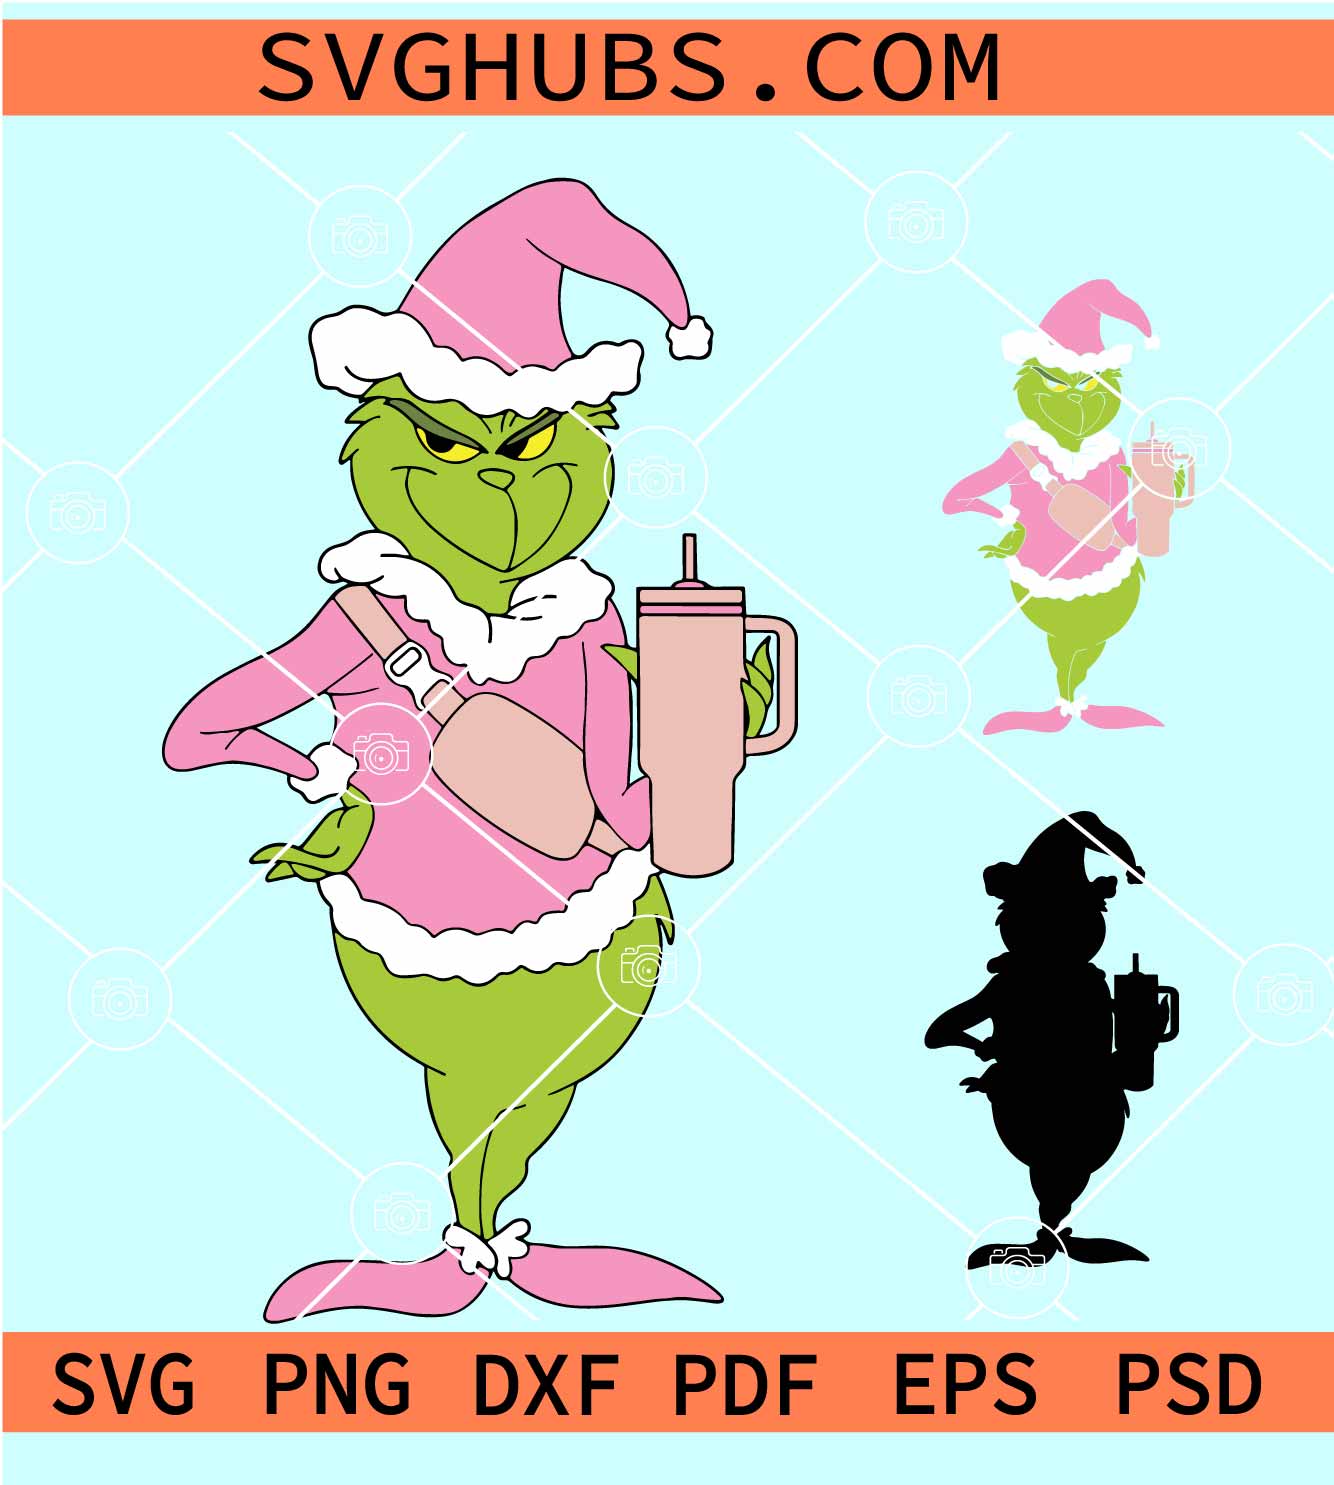 Grinch Stanley Tumbler Bougie Babes SVG, Grinch Cup And Bag SVG